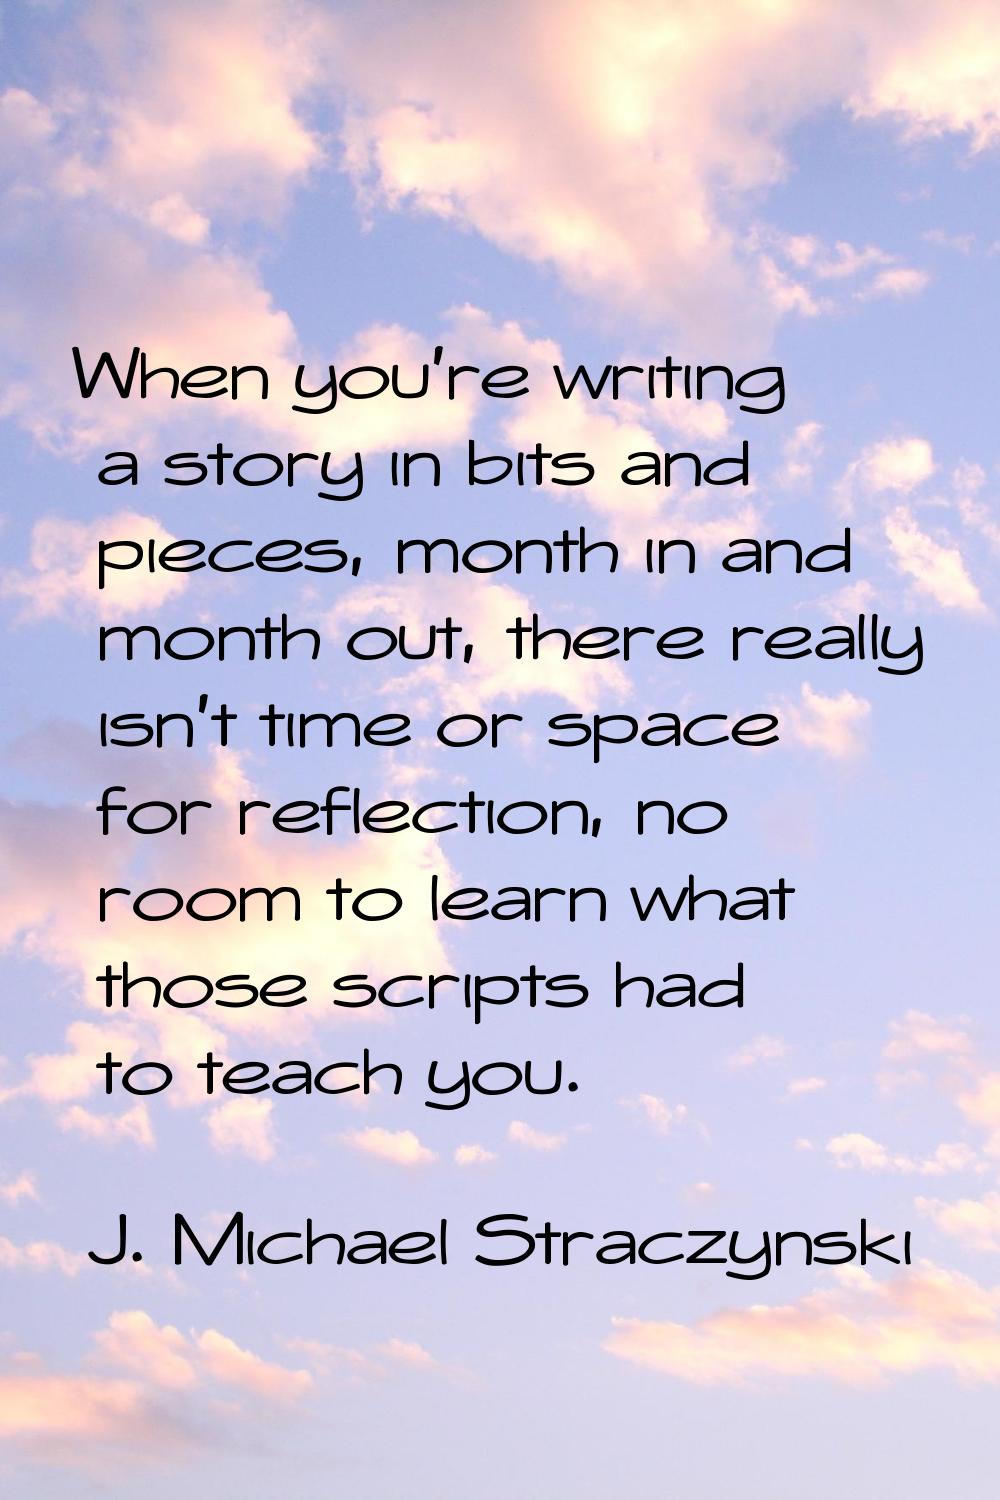 When you're writing a story in bits and pieces, month in and month out, there really isn't time or 